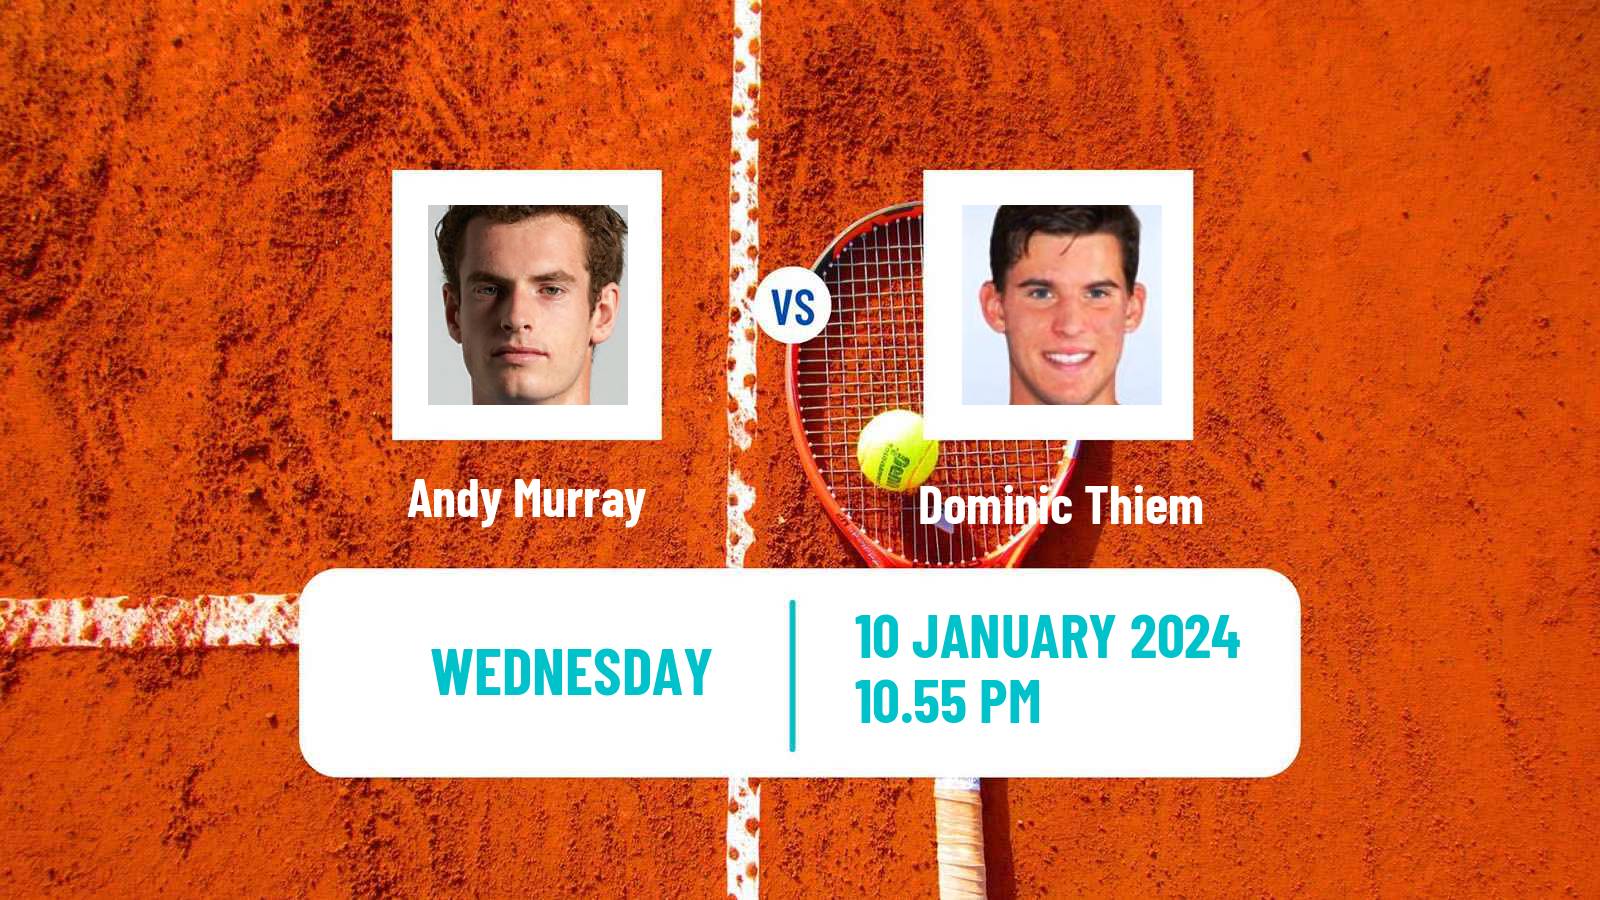 Tennis Exhibition Others Matches Tennis Men Andy Murray - Dominic Thiem